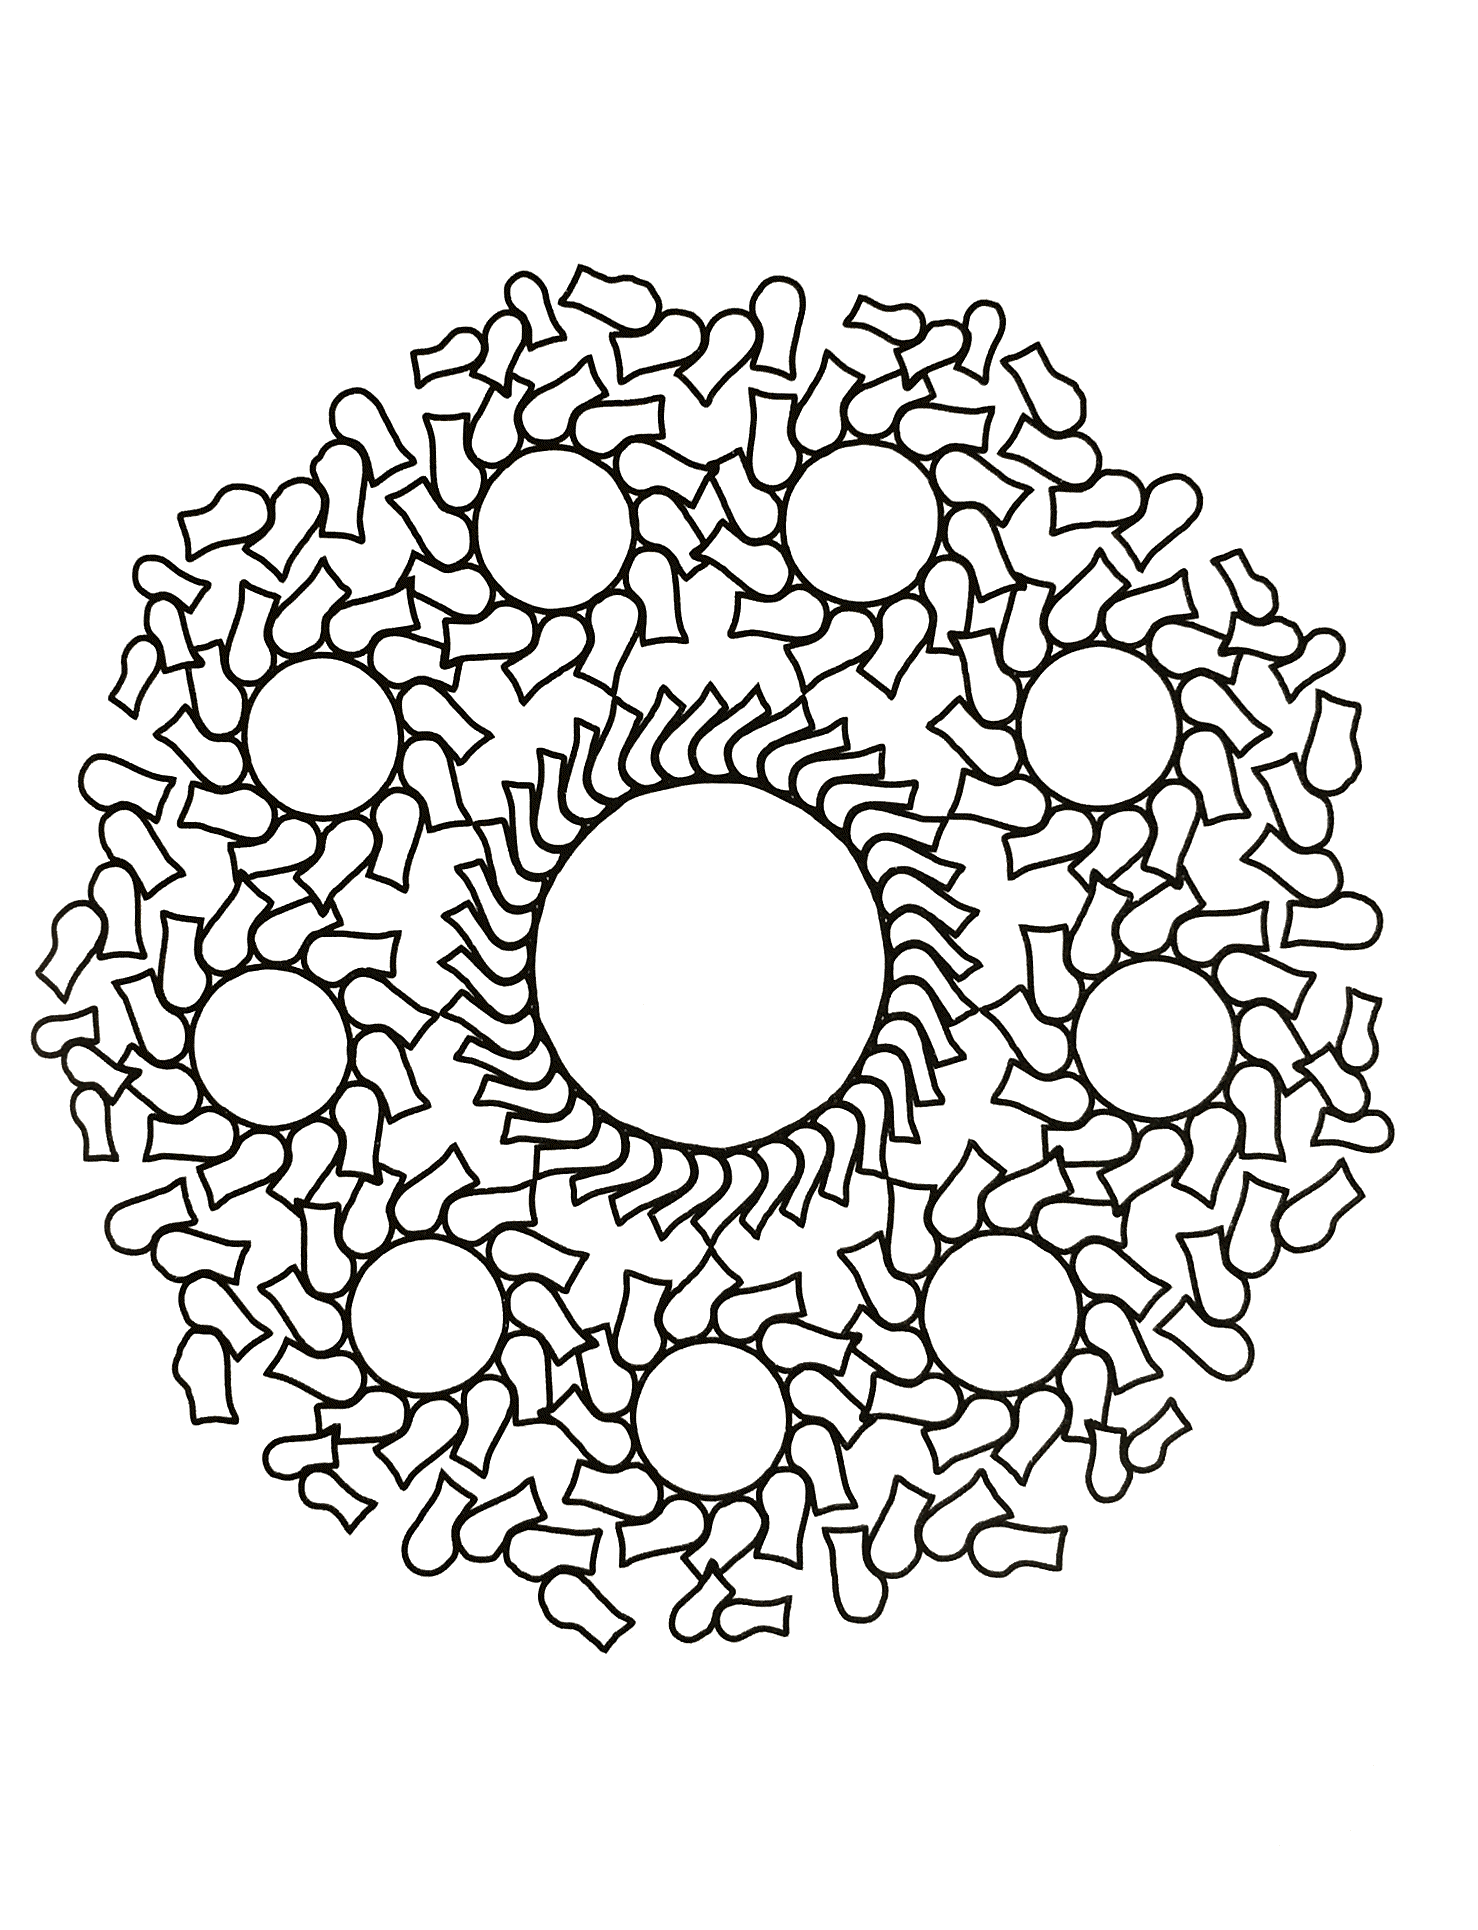 Mandalas to download for free 7 - M&alas Adult Coloring ...